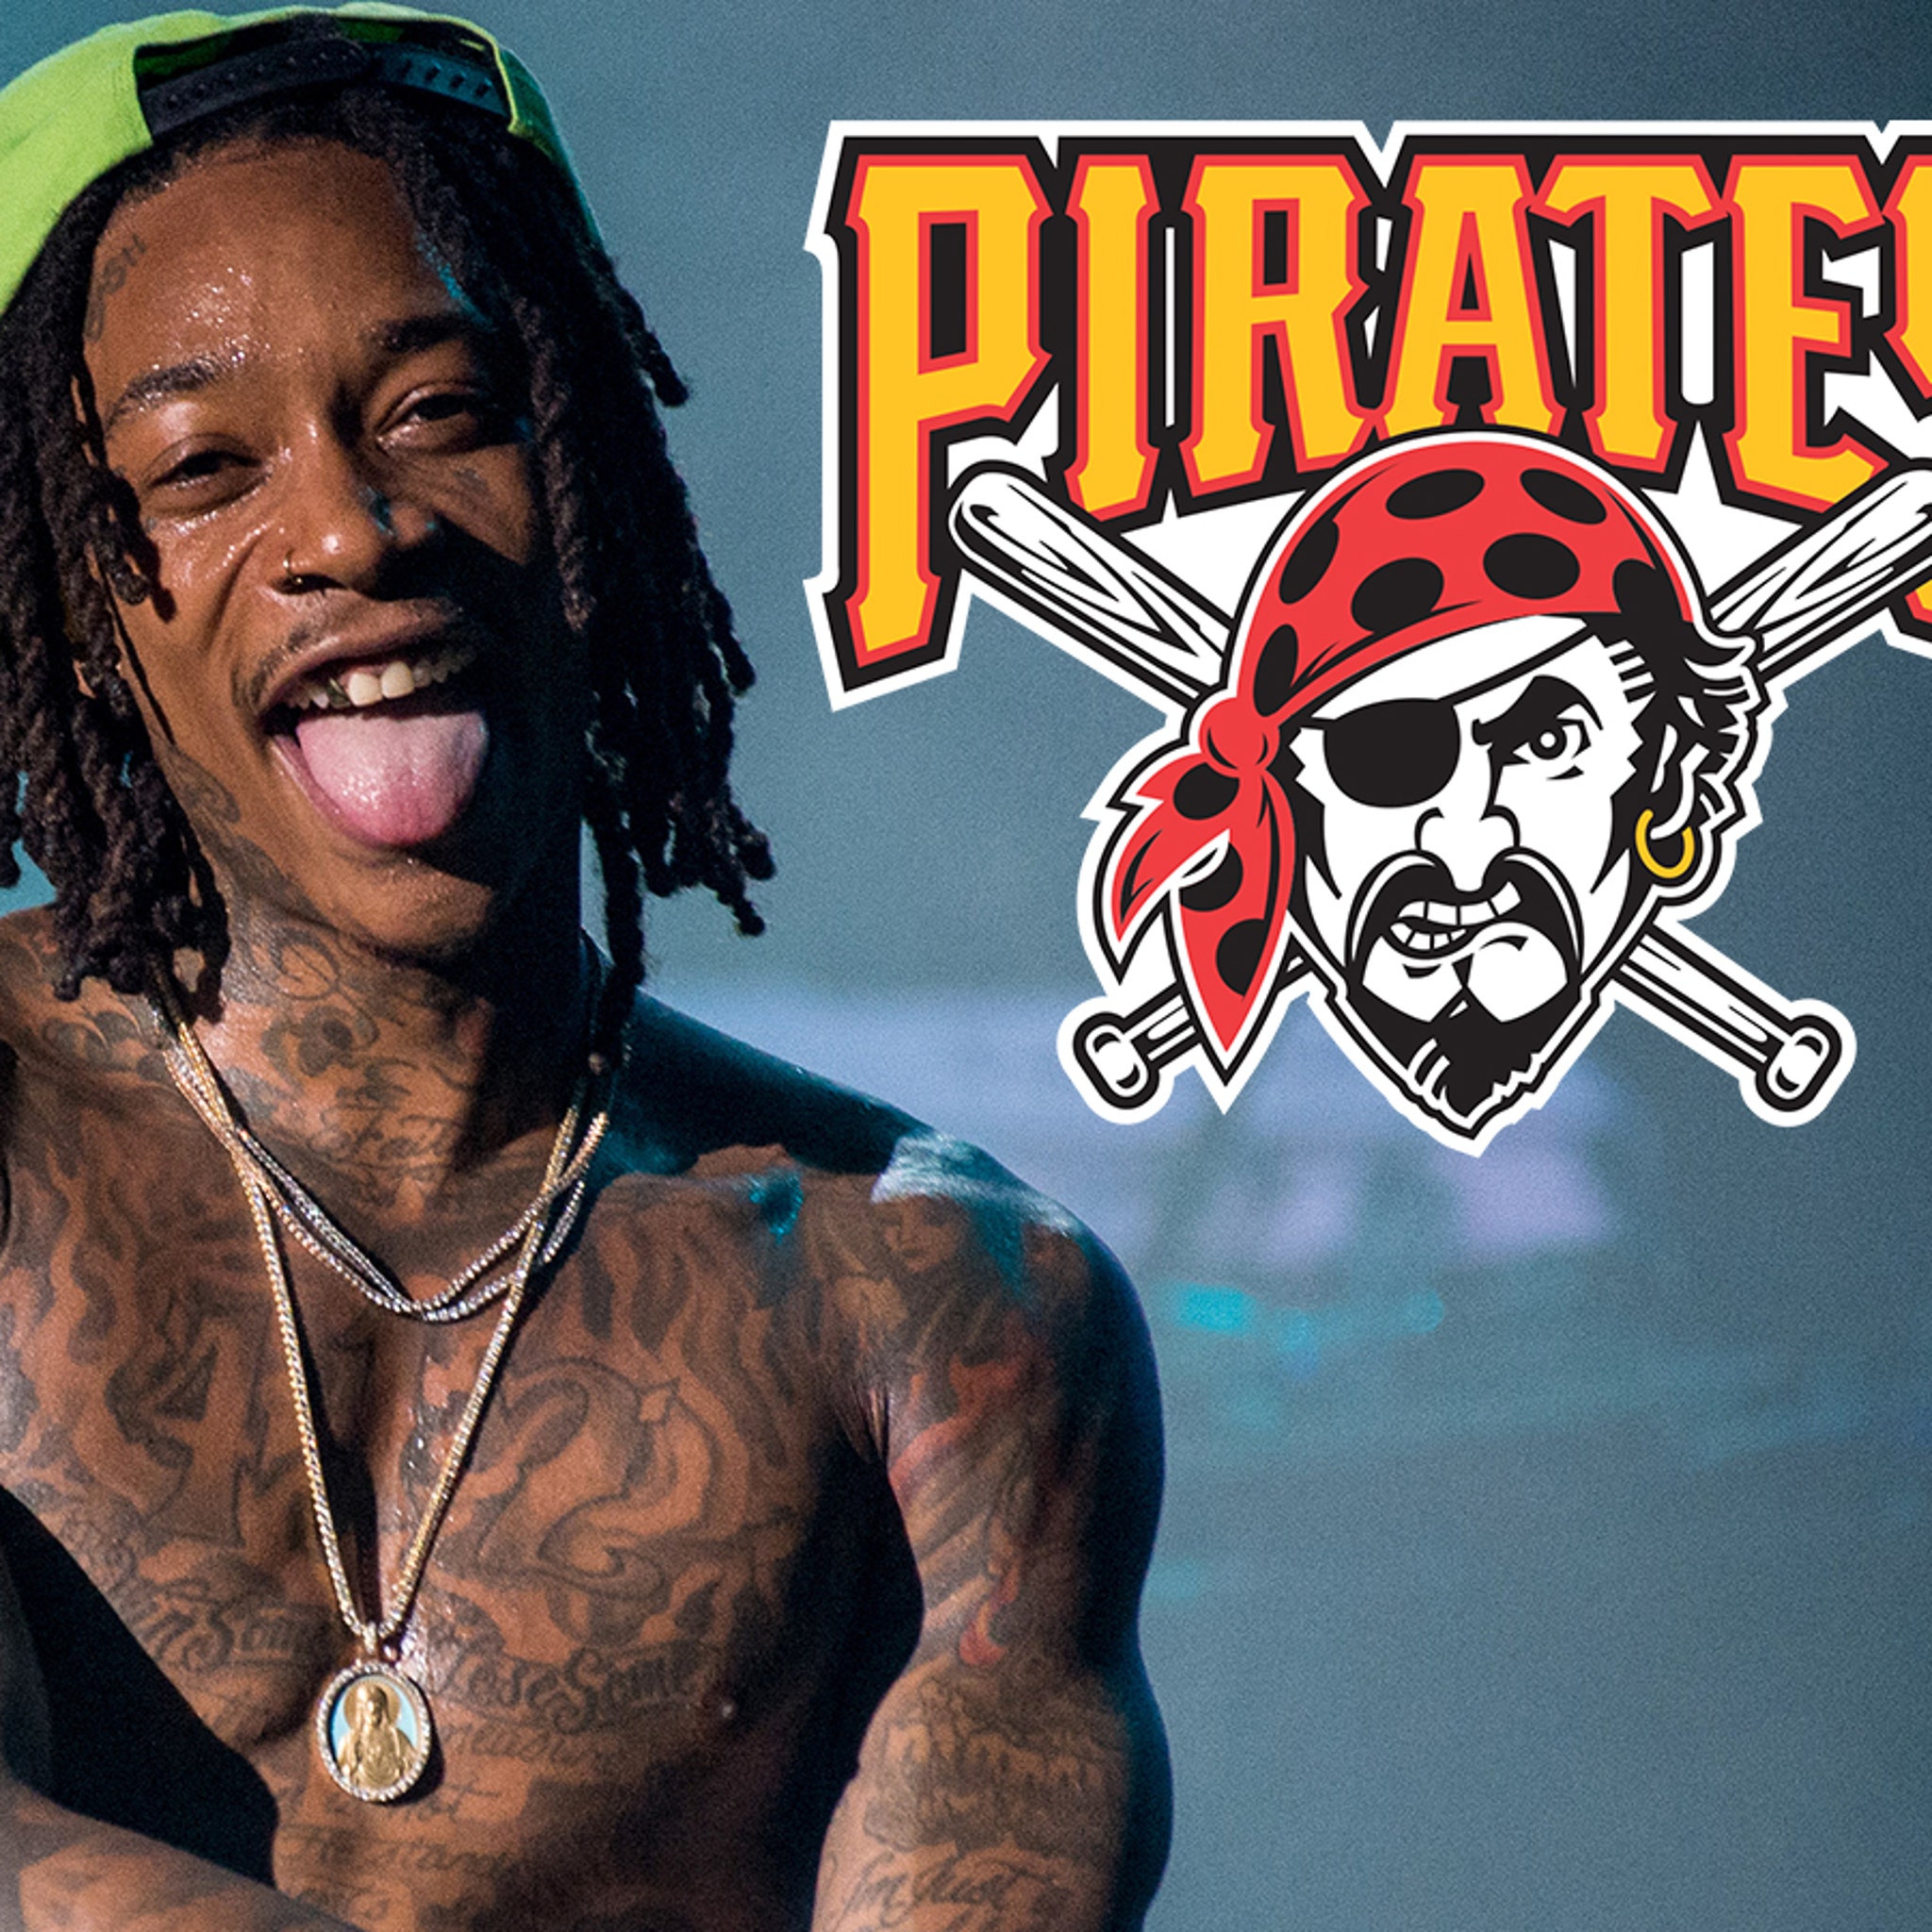 Wiz Khalifa 'Shroomed Out' Before First Pitch at Pirates Game